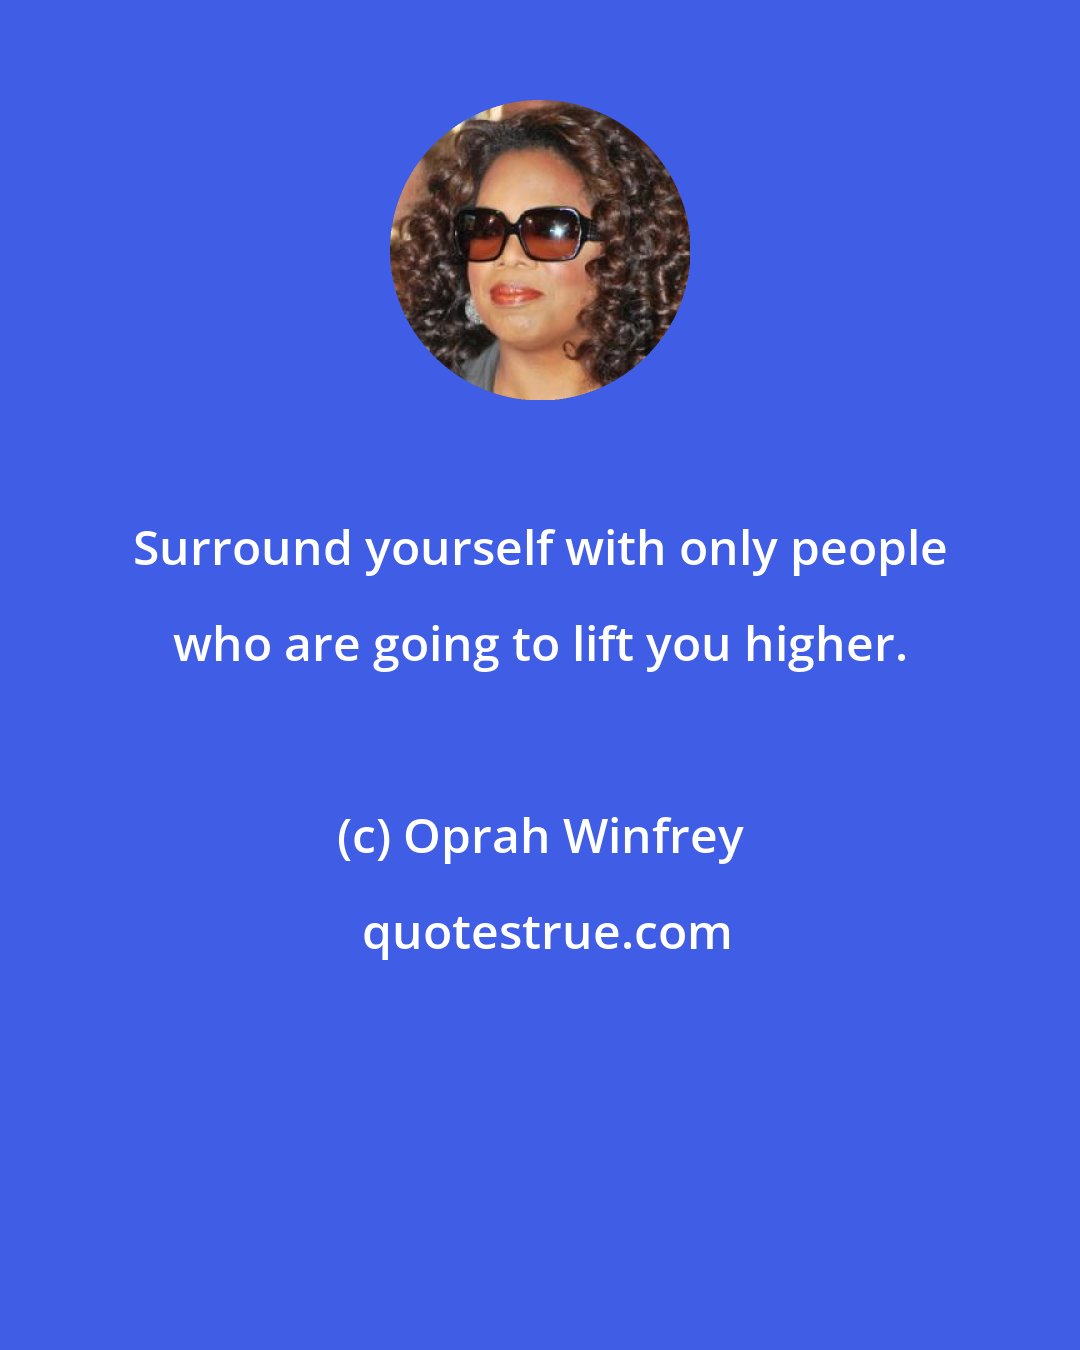 Oprah Winfrey: Surround yourself with only people who are going to lift you higher.